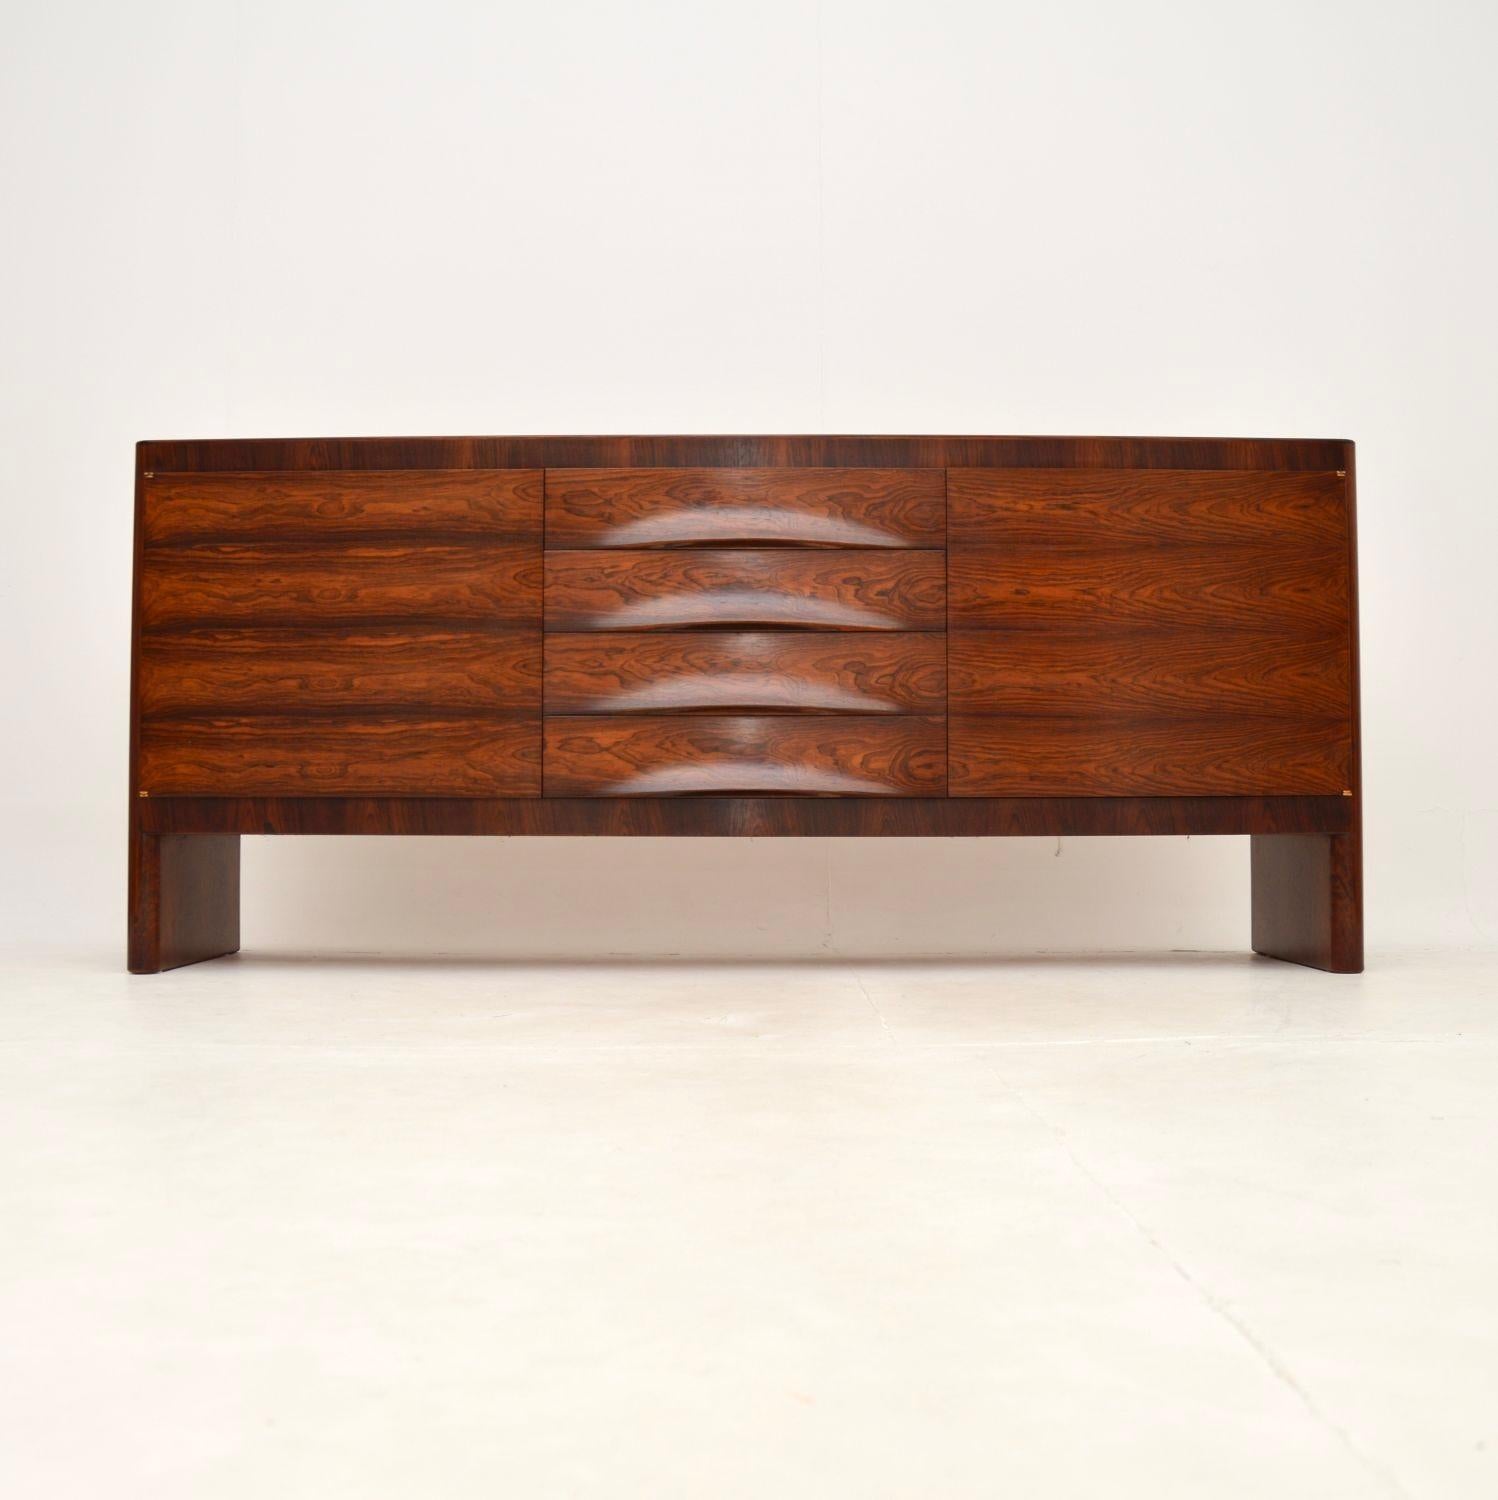 A stylish and extremely rare vintage sideboard by Gordon Russell. This was made in England, it dates from around the 1960-70’s.

This model is hardly ever seen on the market, in the last twenty years we have only ever seen this model once